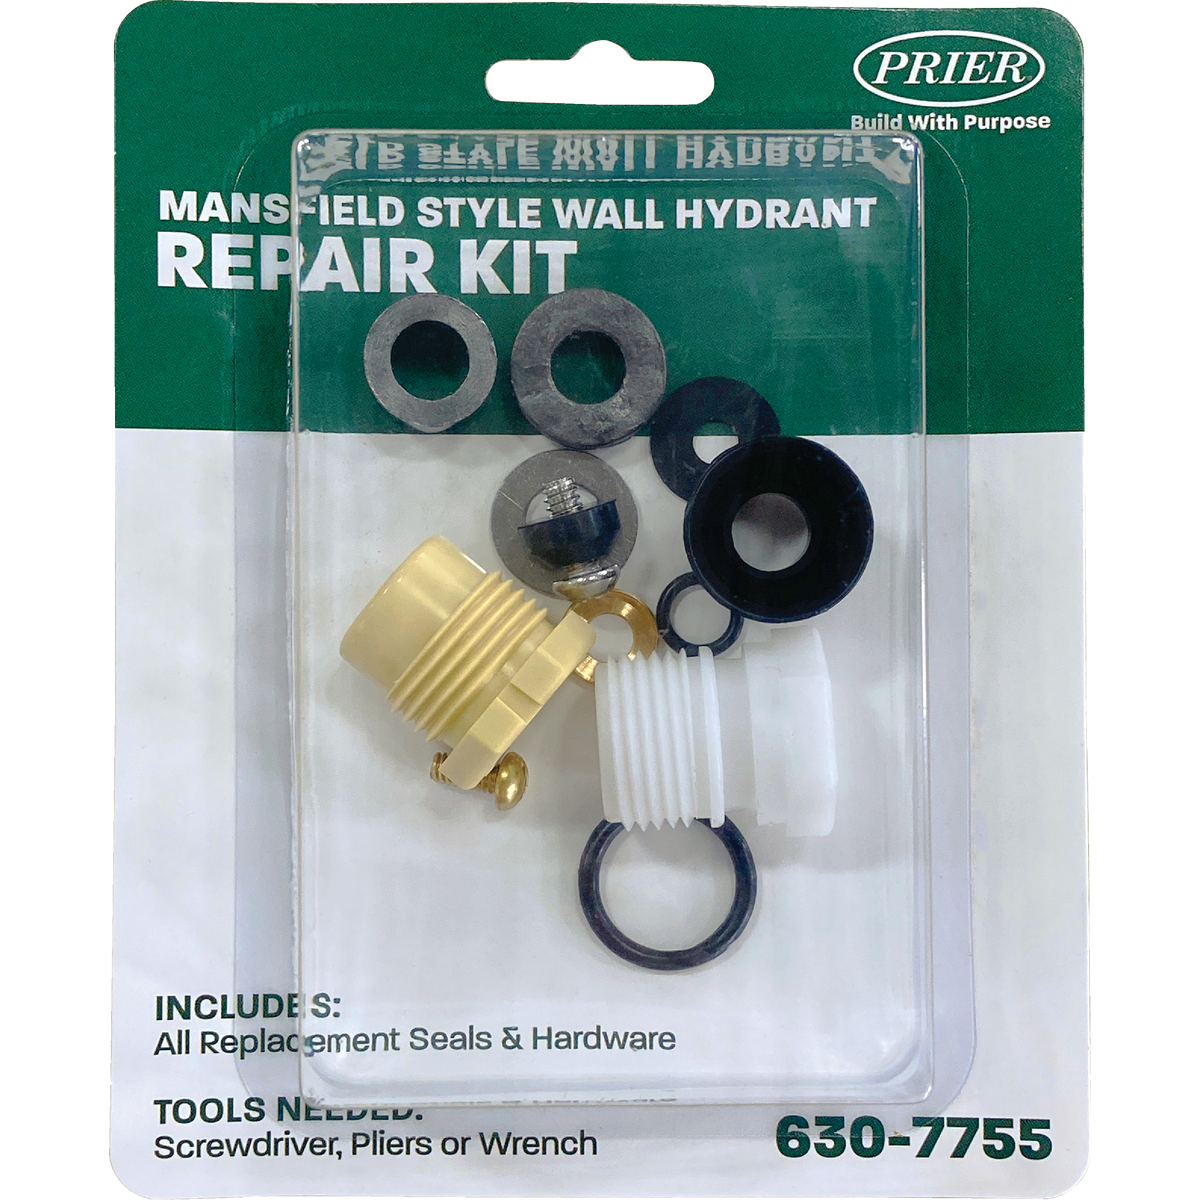 Service Parts Kit for Wall Hydrants